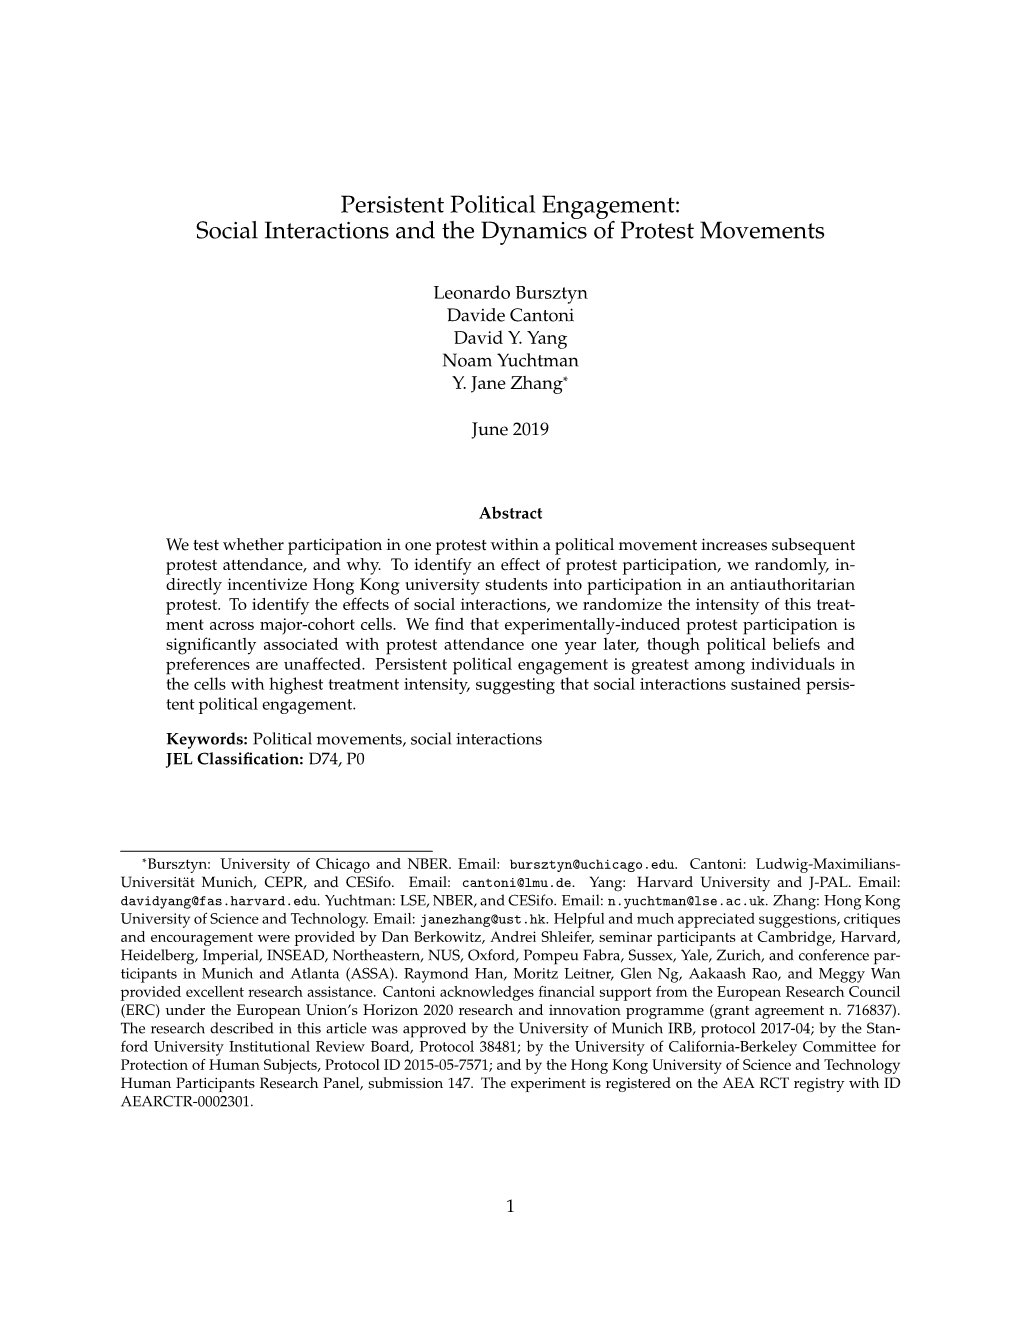 Persistent Political Engagement: Social Interactions and the Dynamics of Protest Movements